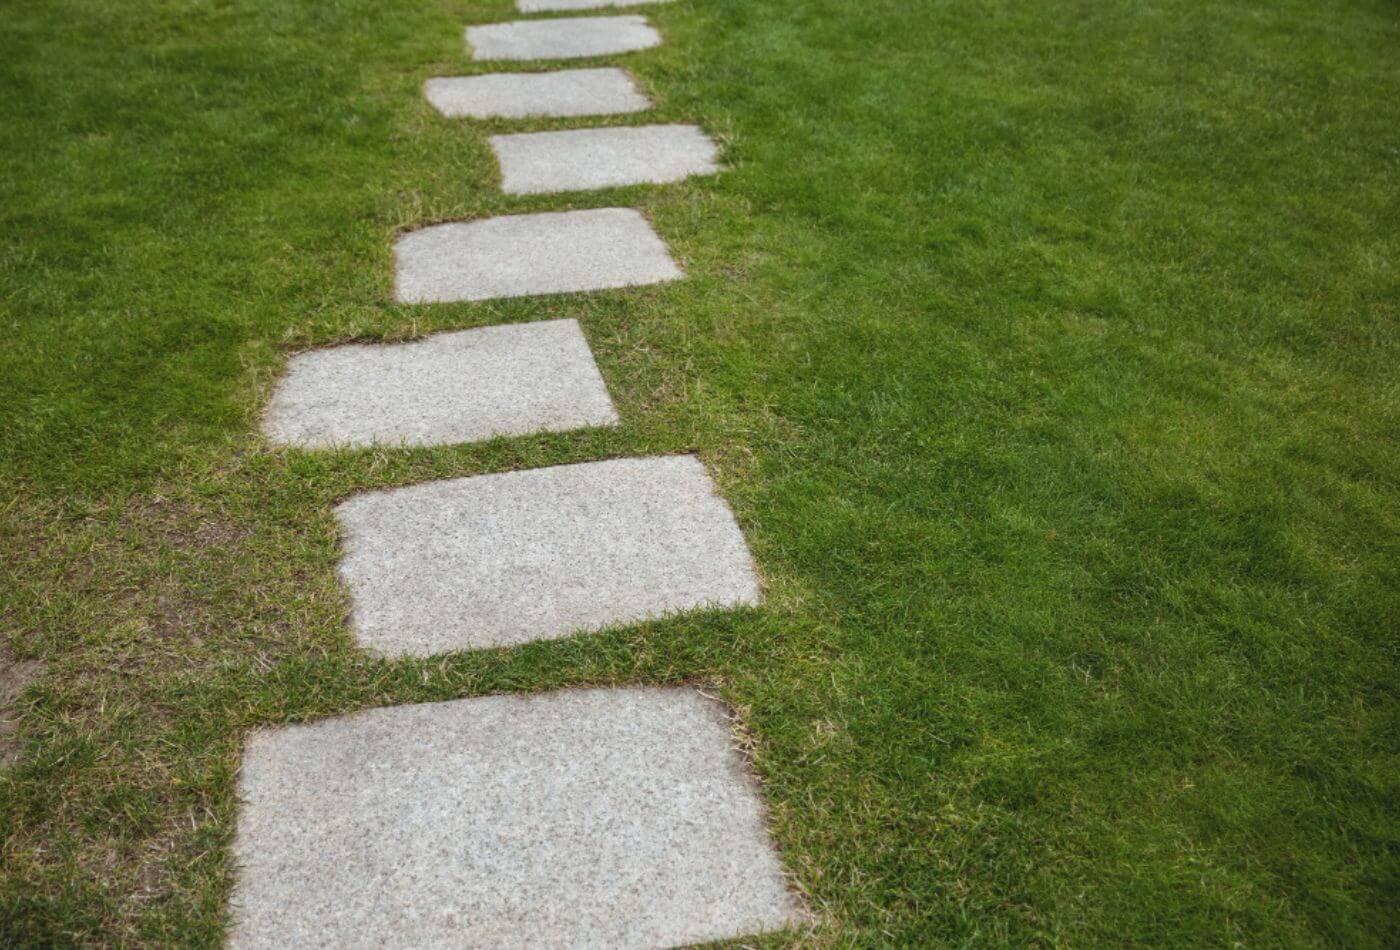 Laying the Slabs Directly Onto the Grass: is This Right or Wrong?